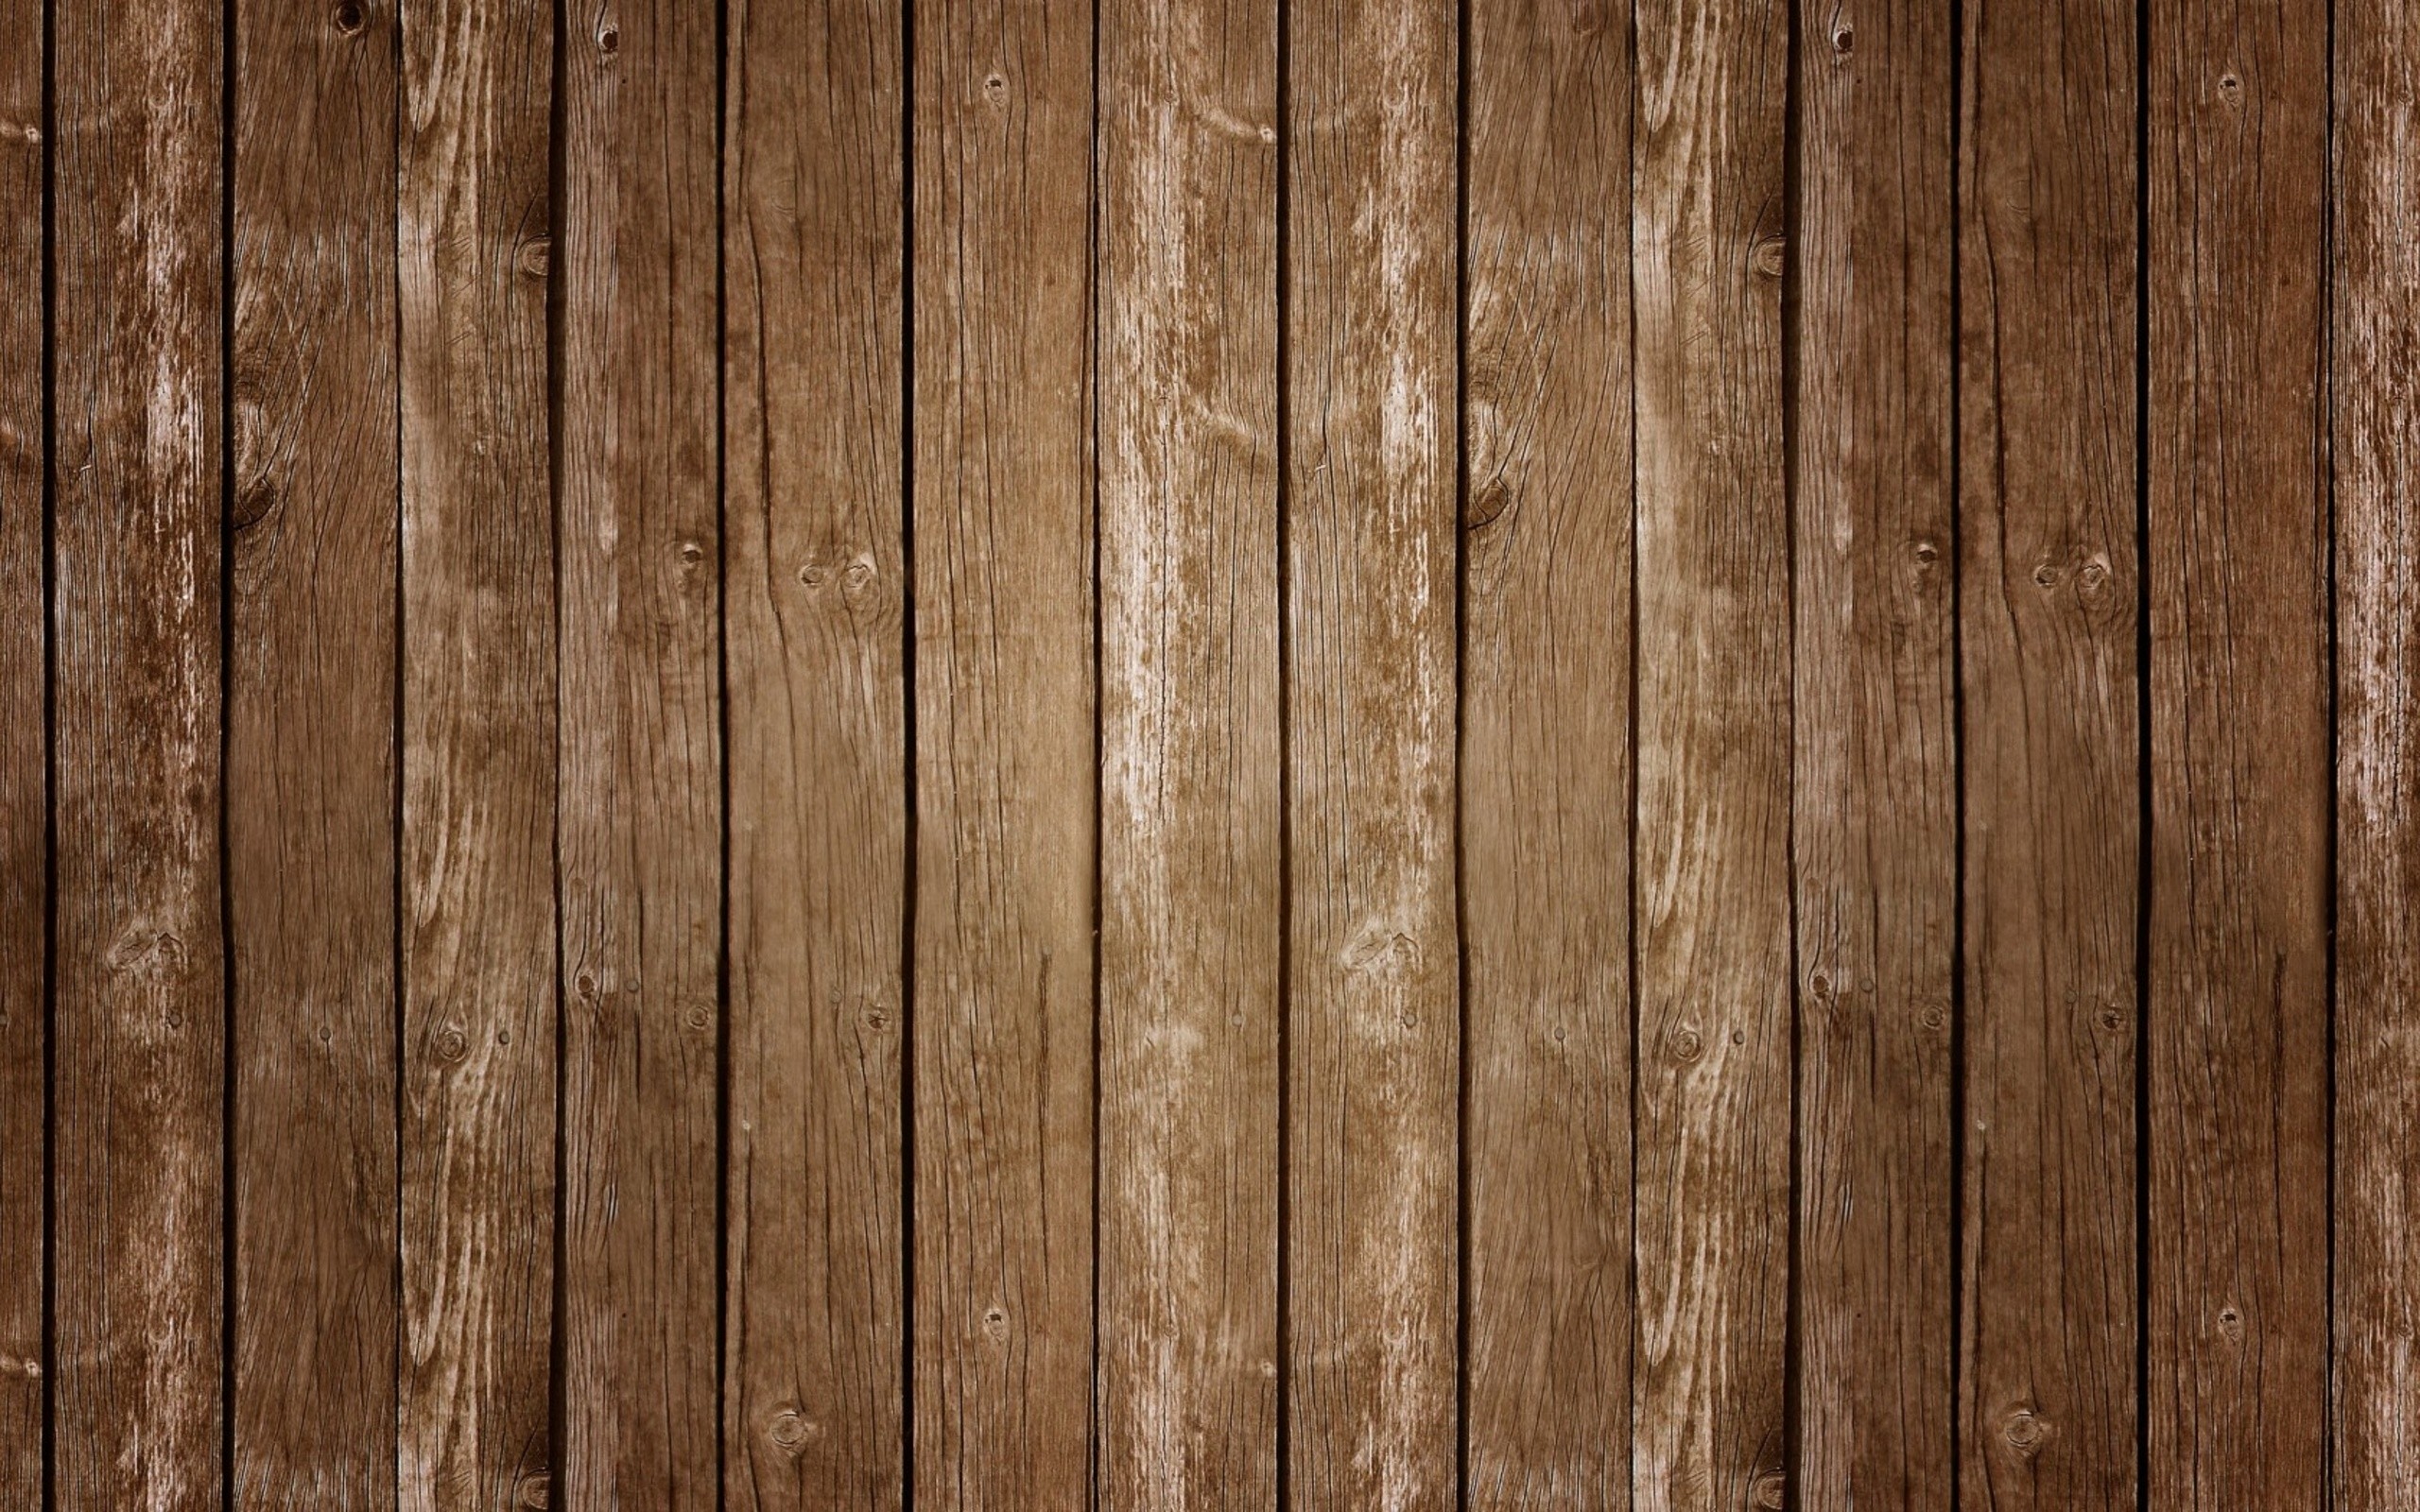 2560x1600 Wood HD Wallpaper | Background Image |  | ID:370799 - Wallpaper  Abyss